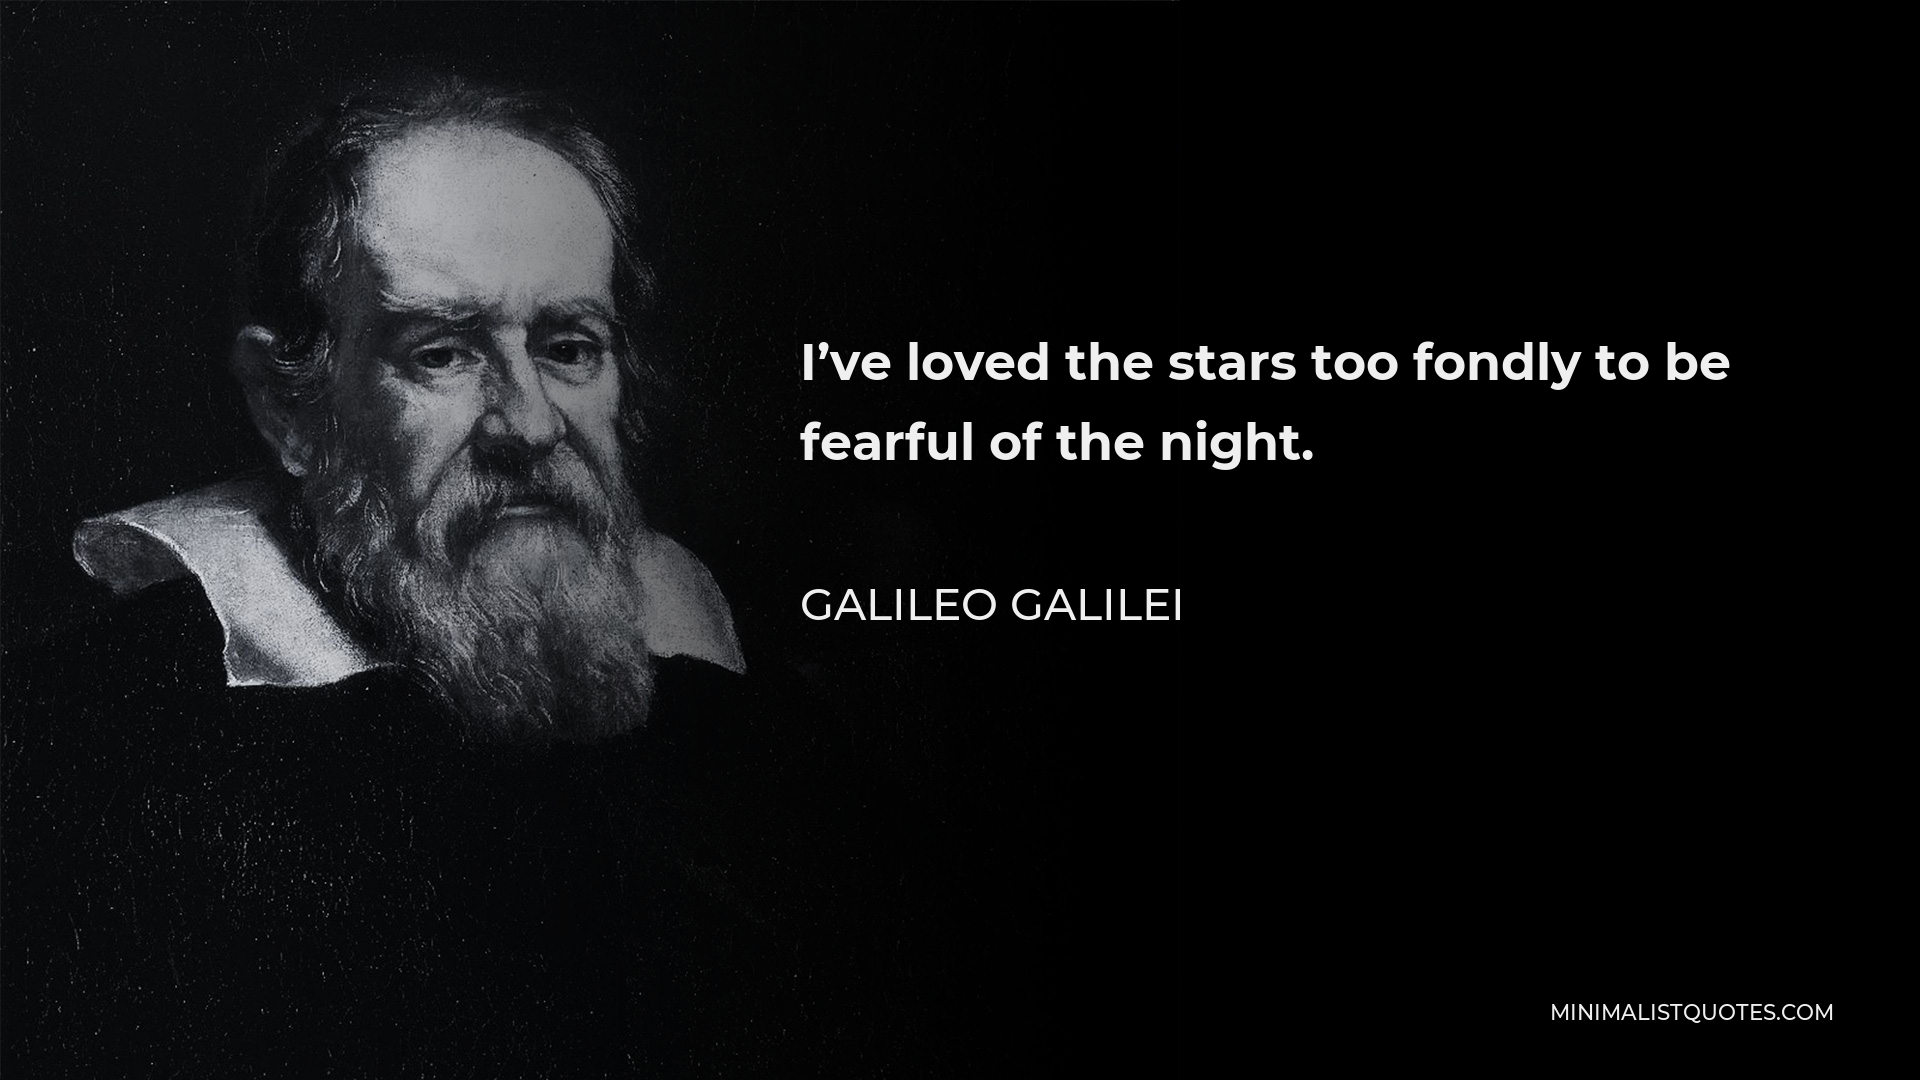 Galileo Galilei Quote - I’ve loved the stars too fondly to be fearful of the night.